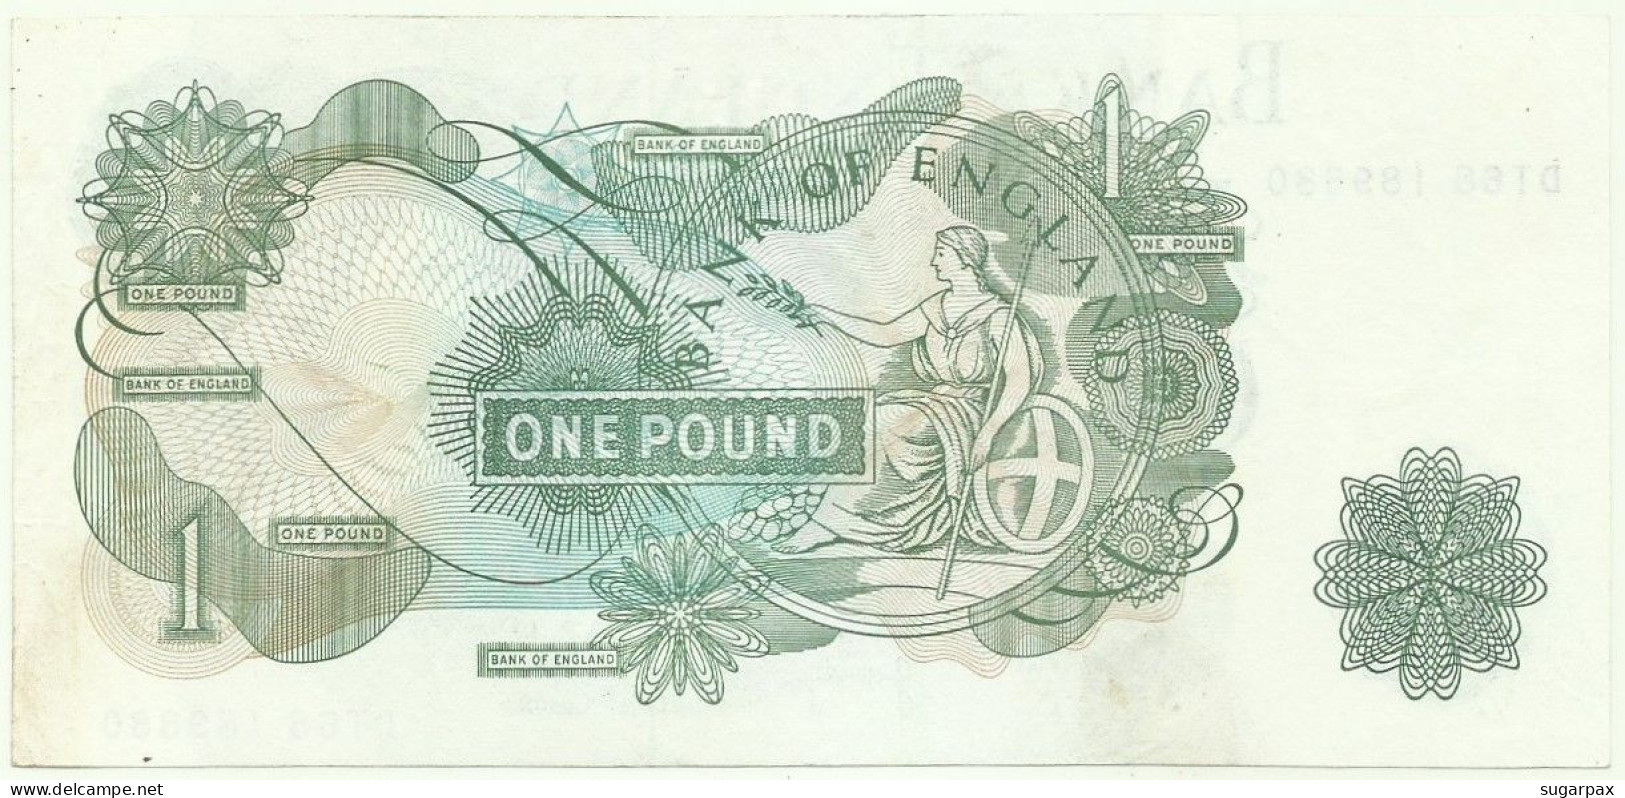 GREAT BRITAIN - 1 POUND - ND ( 1970-77 ) - P 374 G - Serie DT68 - BANK OF ENGLAND - United Kingdom - 1 Pond